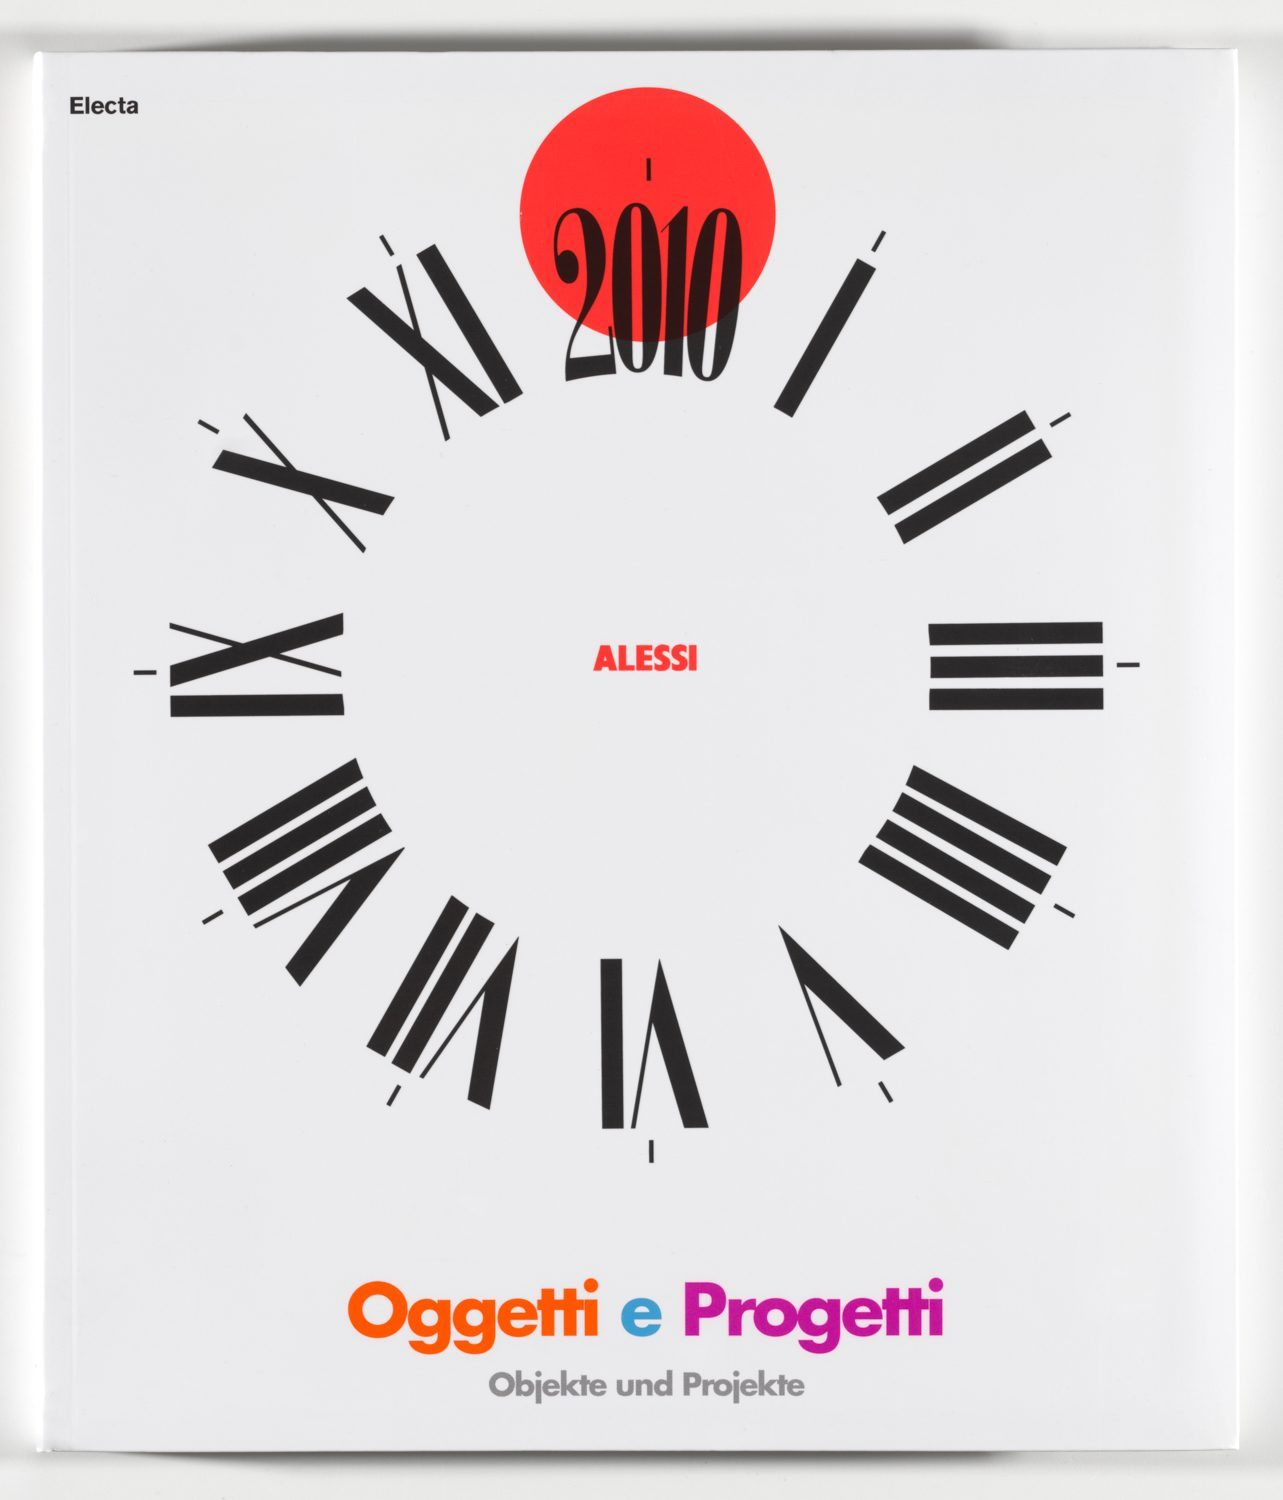 Black dial with Roman numerals on a white background. The 12 is replaced by 2010 on a red circle slightly shifted upwards. Inscription in red in the centre: Alessi. Inscription below, in orange, blue, pink and grey: Oggetti e Progetti. Objekte und Projekte.